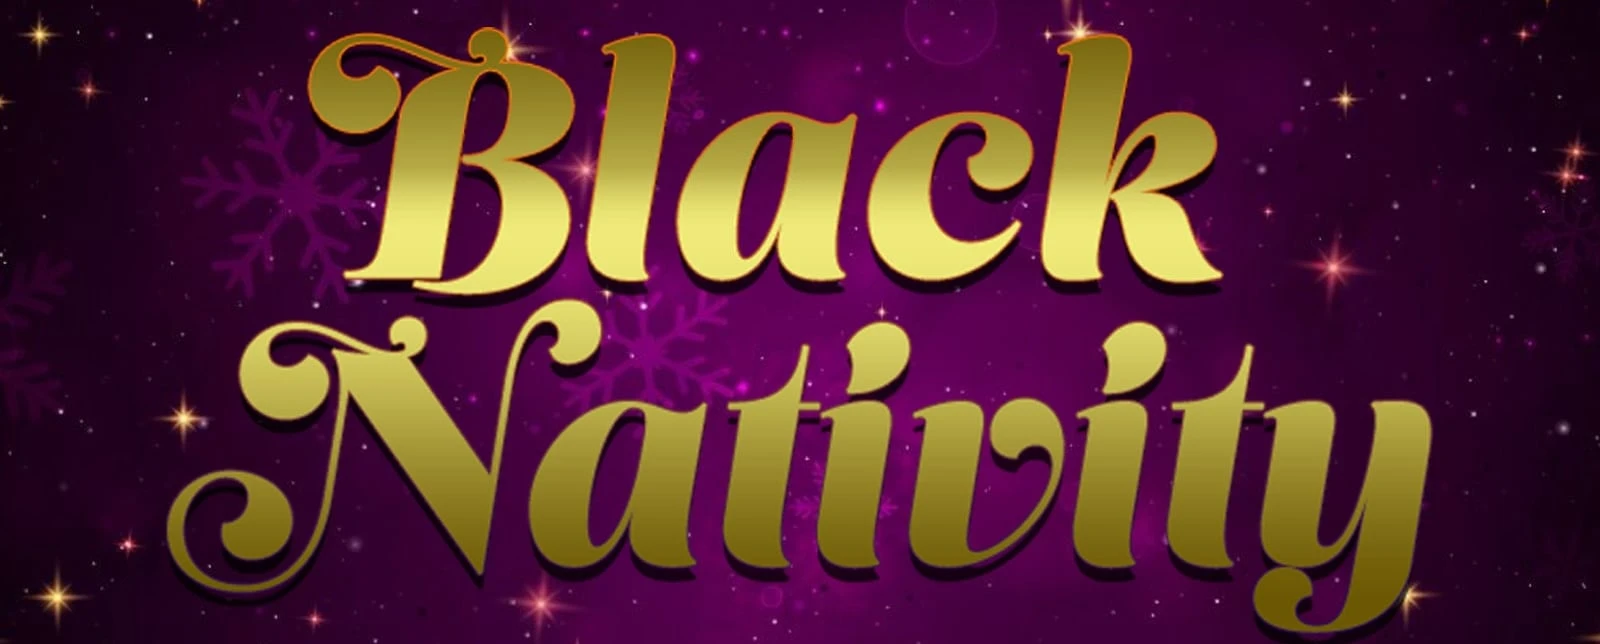 "Black Nativity": A Gospel Christmas Experience: What to expect - 1